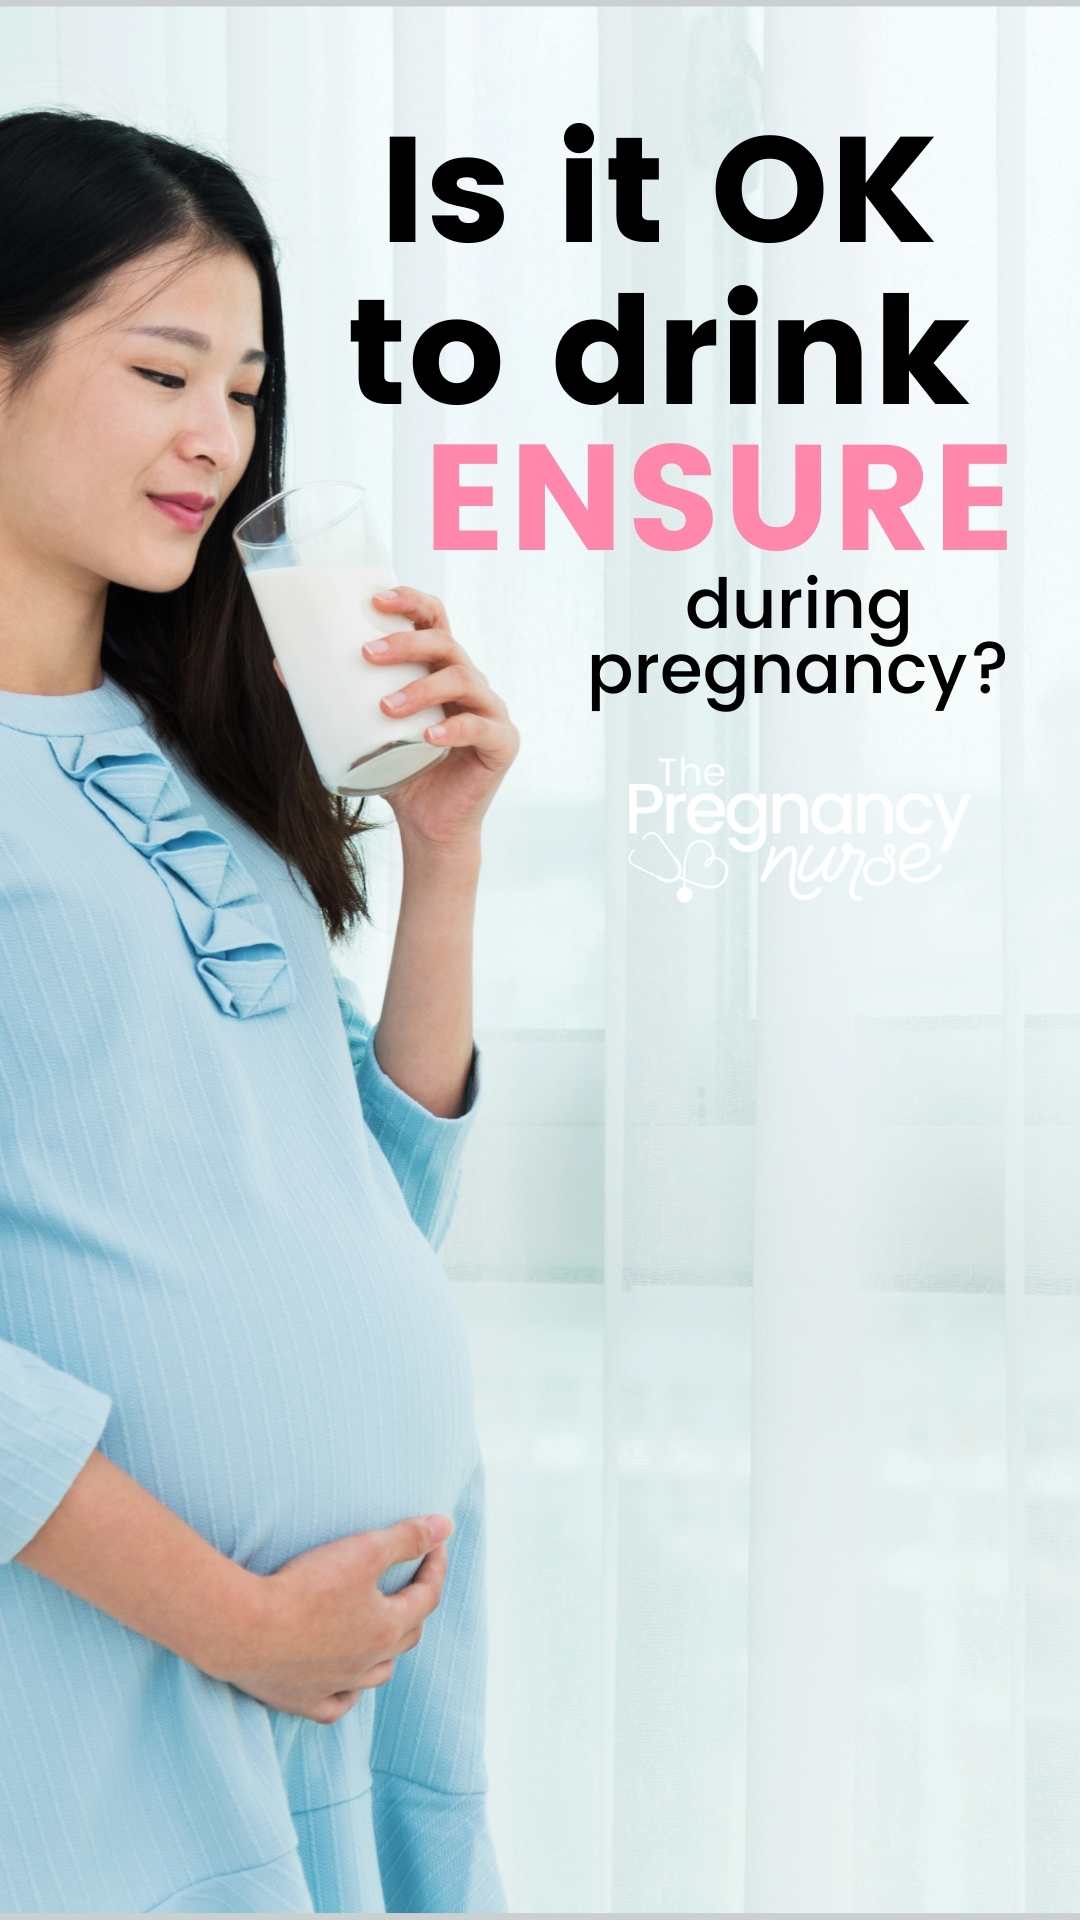 You may make the choice to drink ensure while pregnant. Is this nutrient-dense formula something that pregnant people need during their pregnancy?